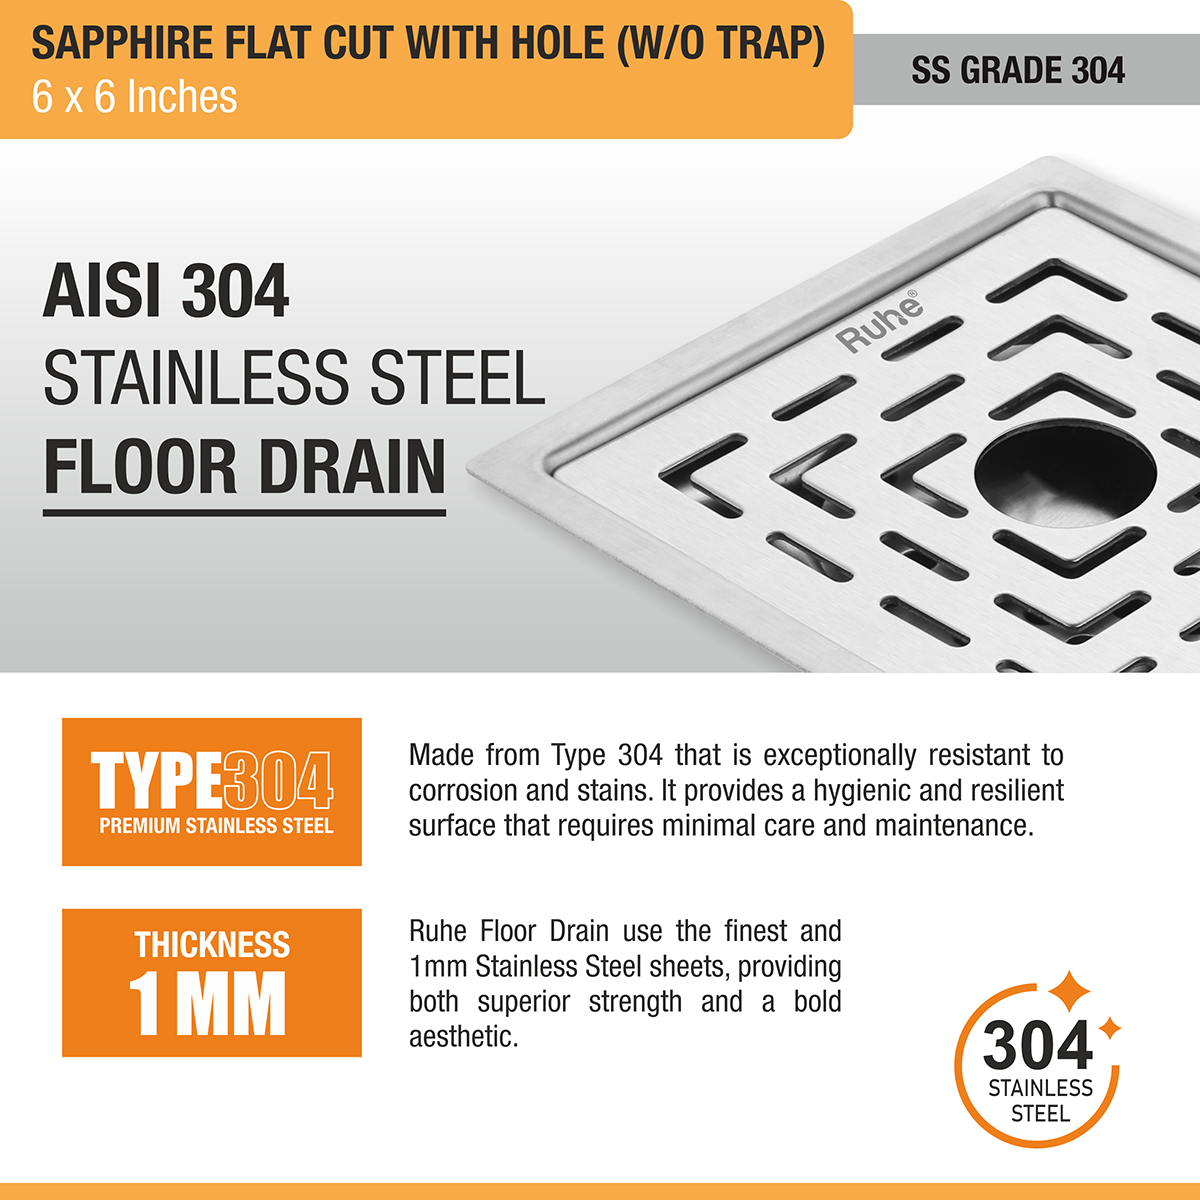 Sapphire Square Flat Cut 304-Grade Floor Drain with Hole (6 x 6 Inches) stainless steel